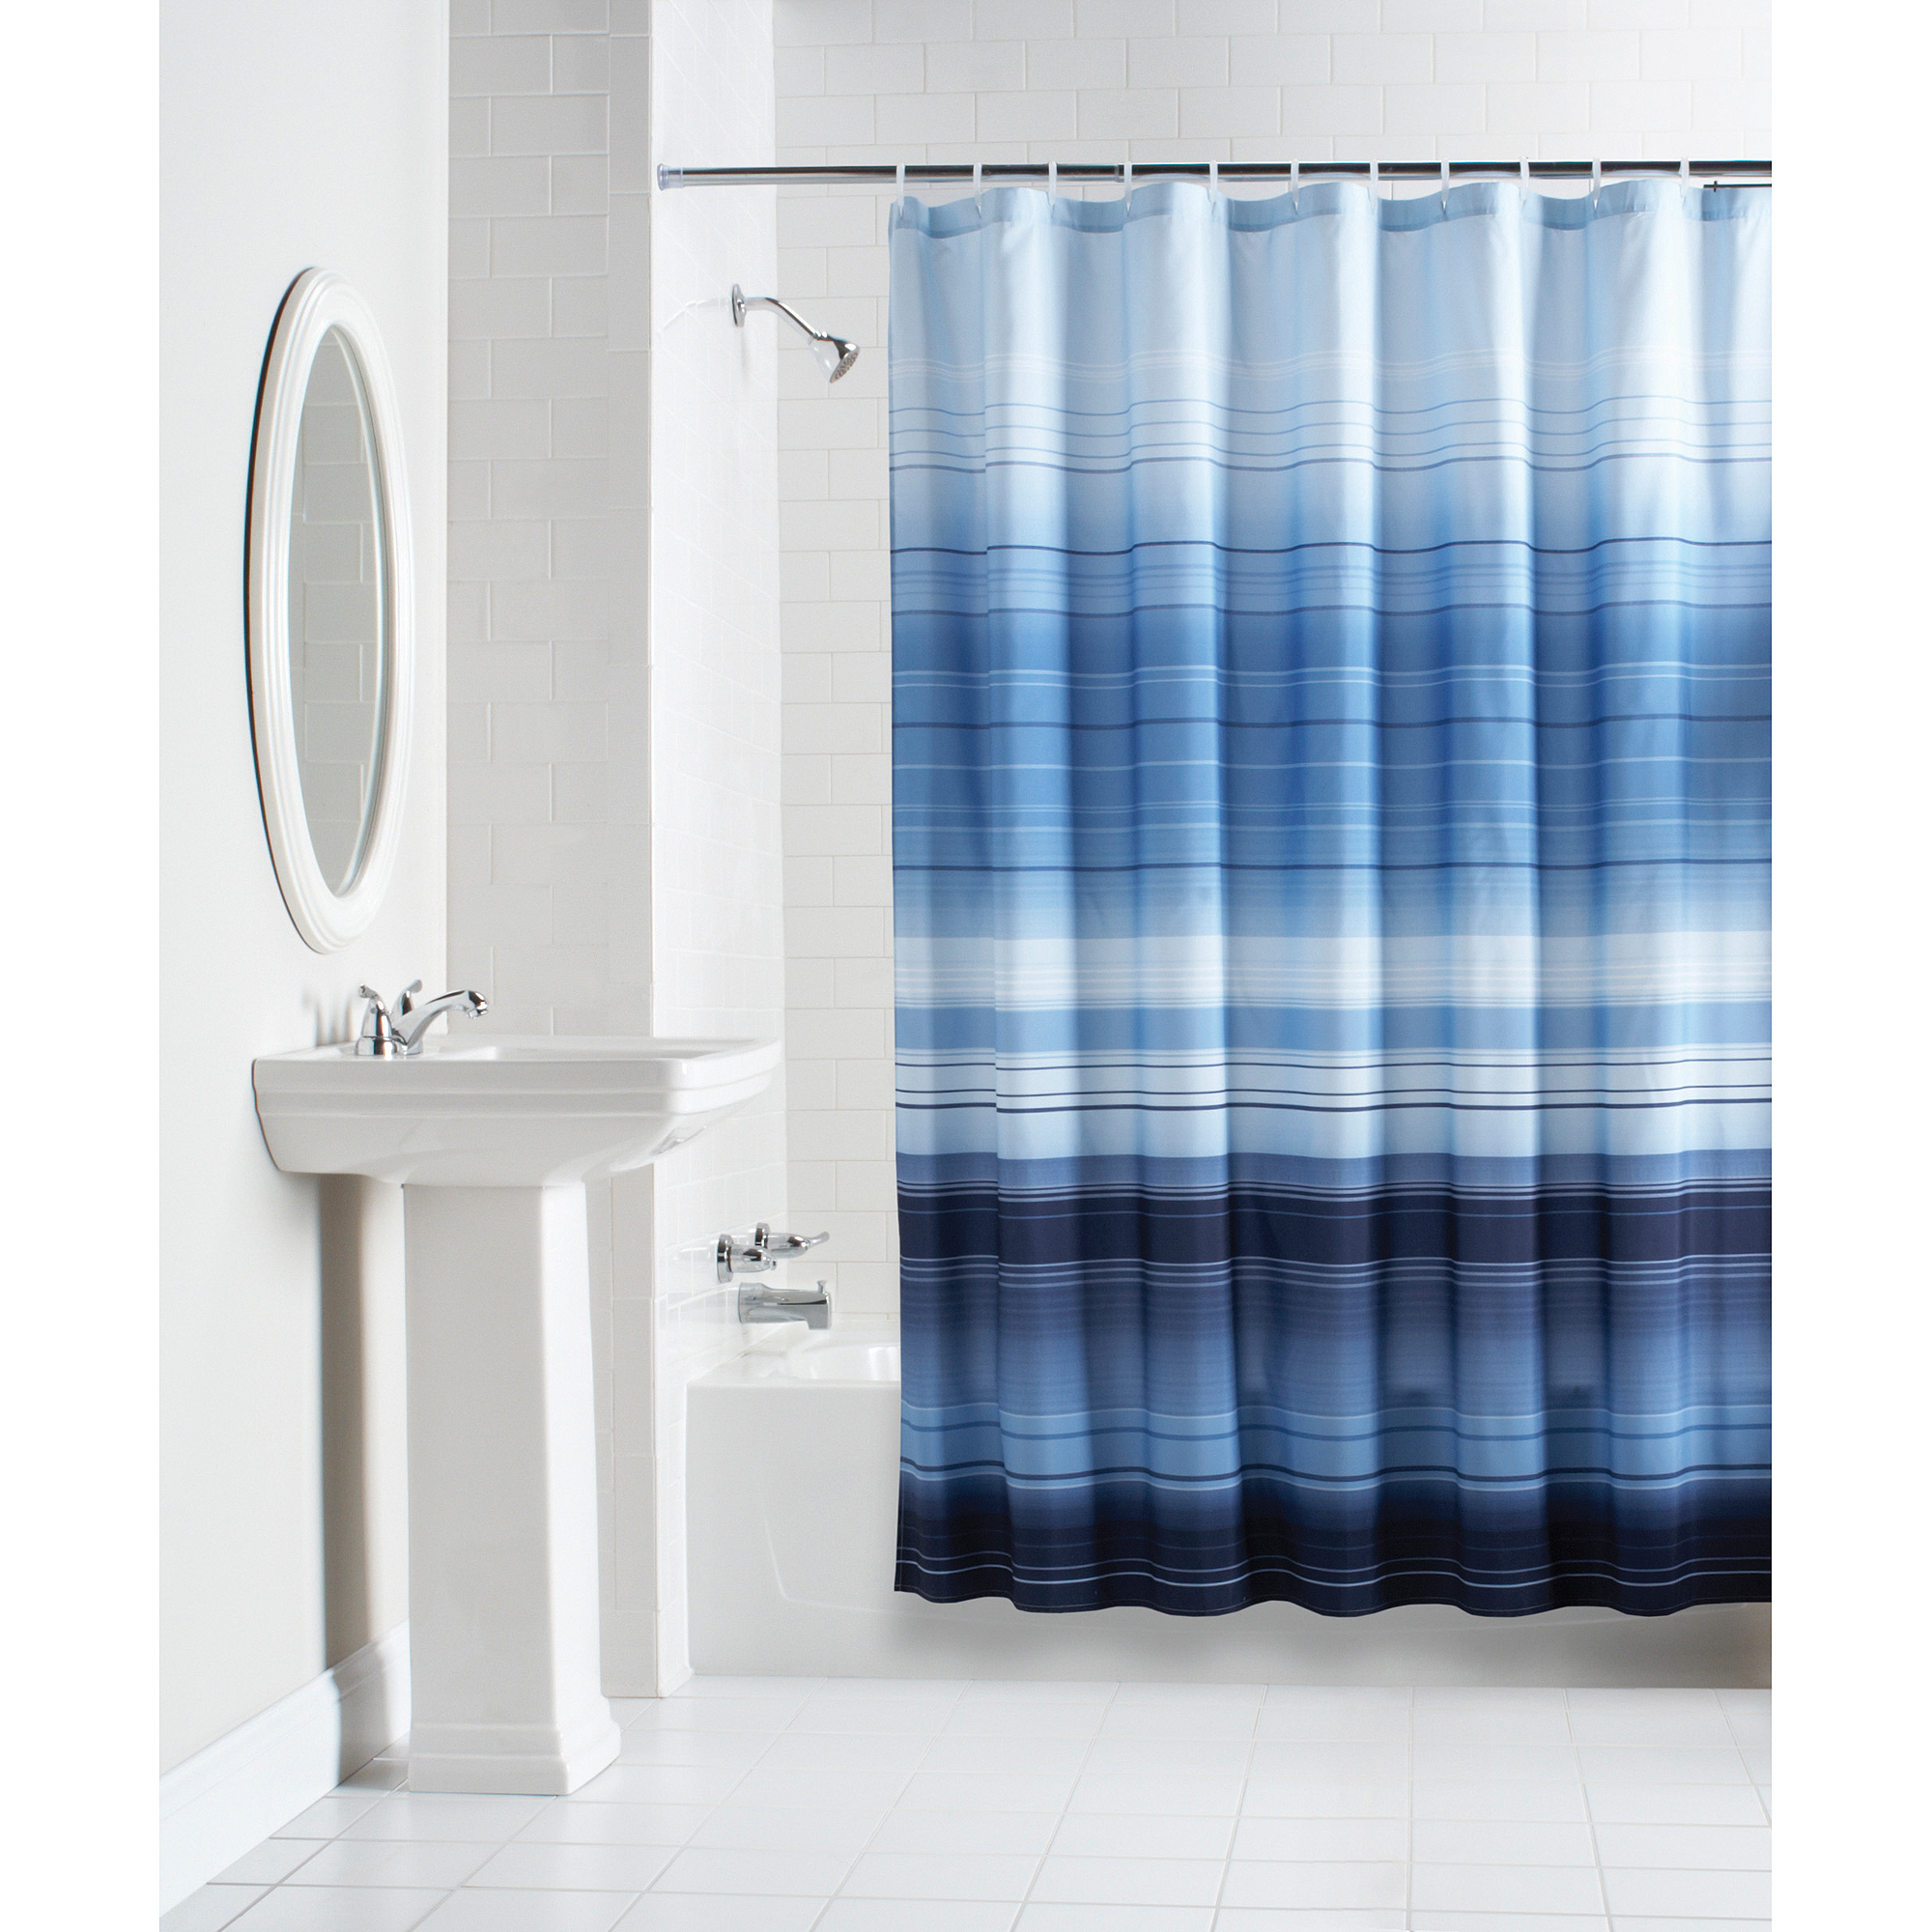 Facts about shower curtain